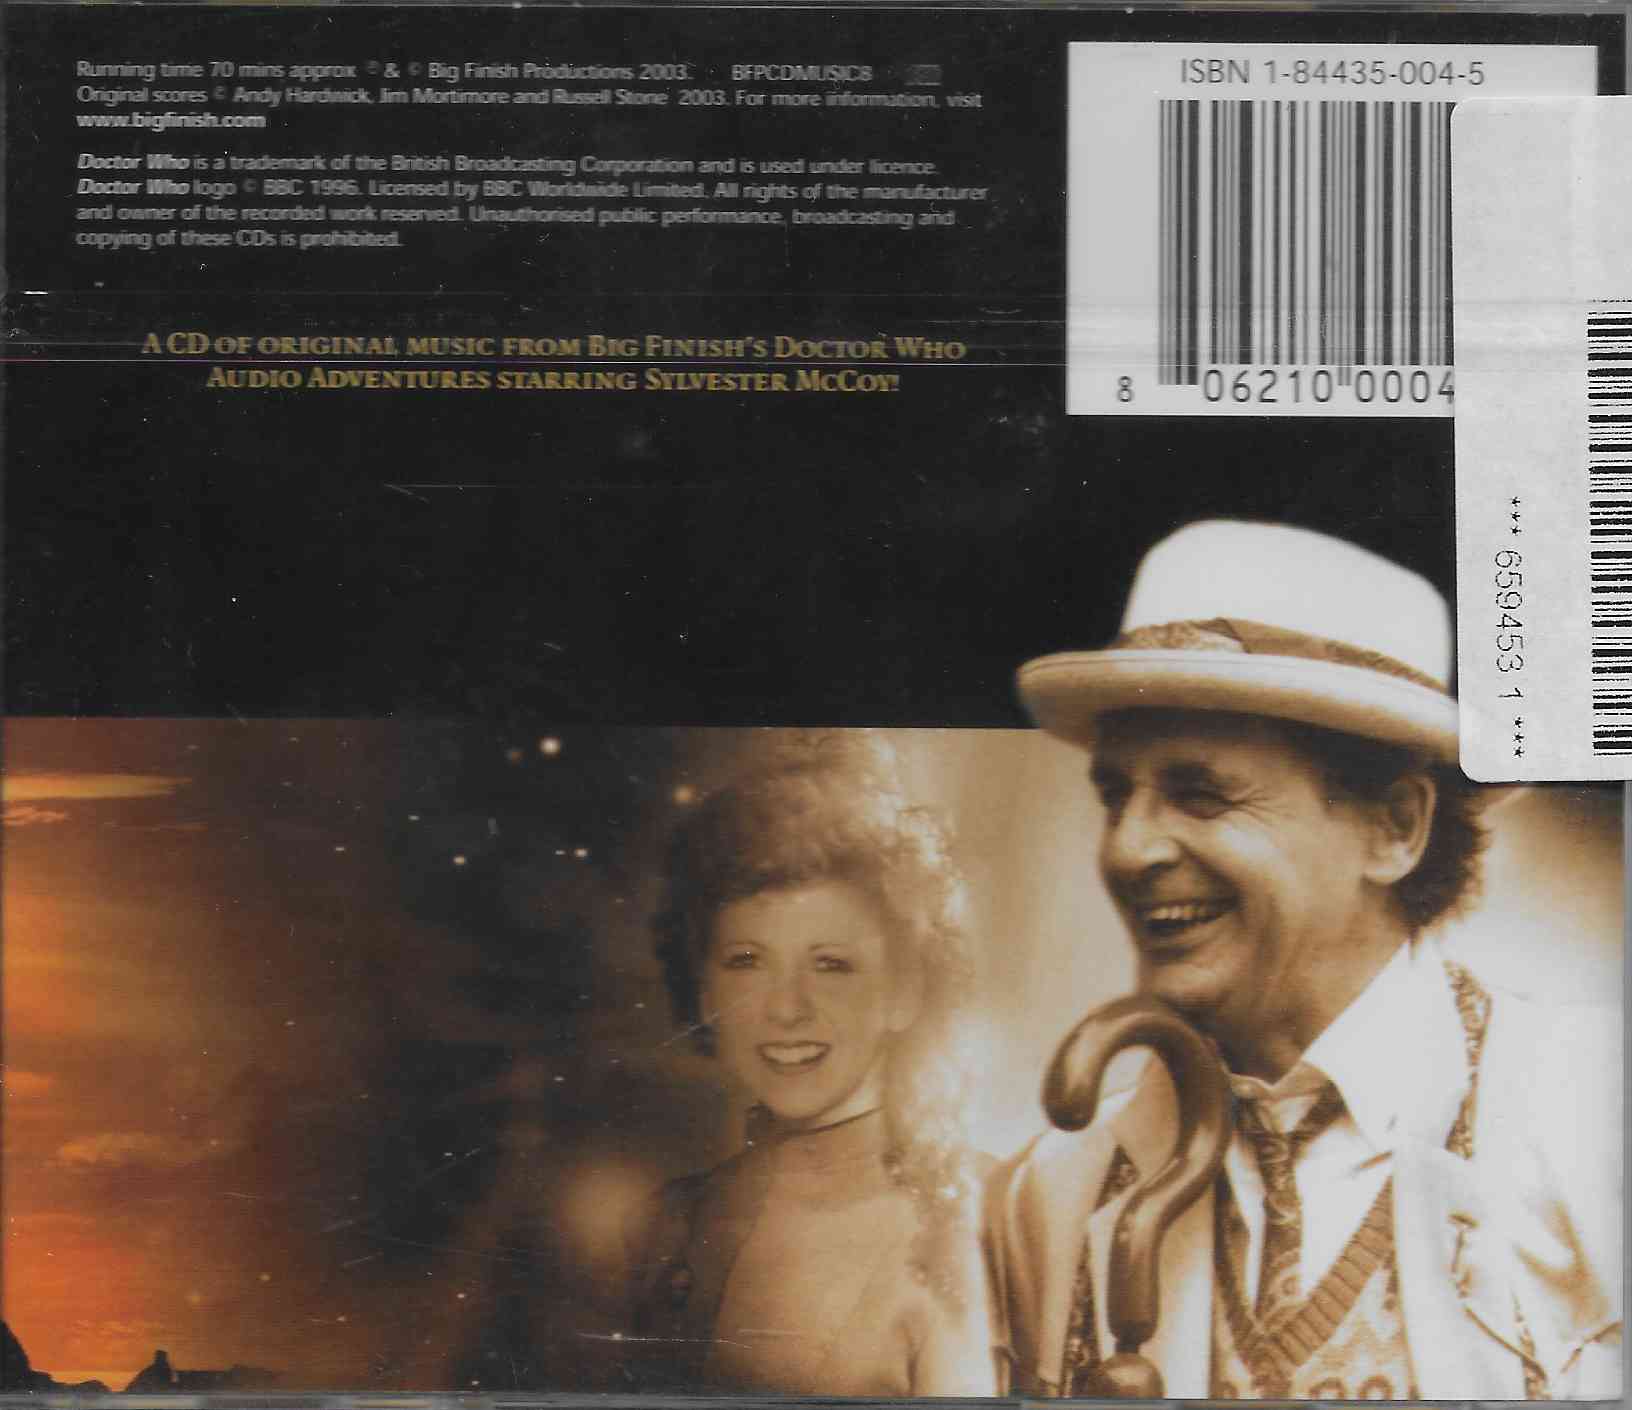 Picture of ISBN 1-84435-004-5 Doctor Who - The seventh Doctor audio adventures by artist Andy Hardwick / Jim Mortimore / Russell Stone from the BBC records and Tapes library